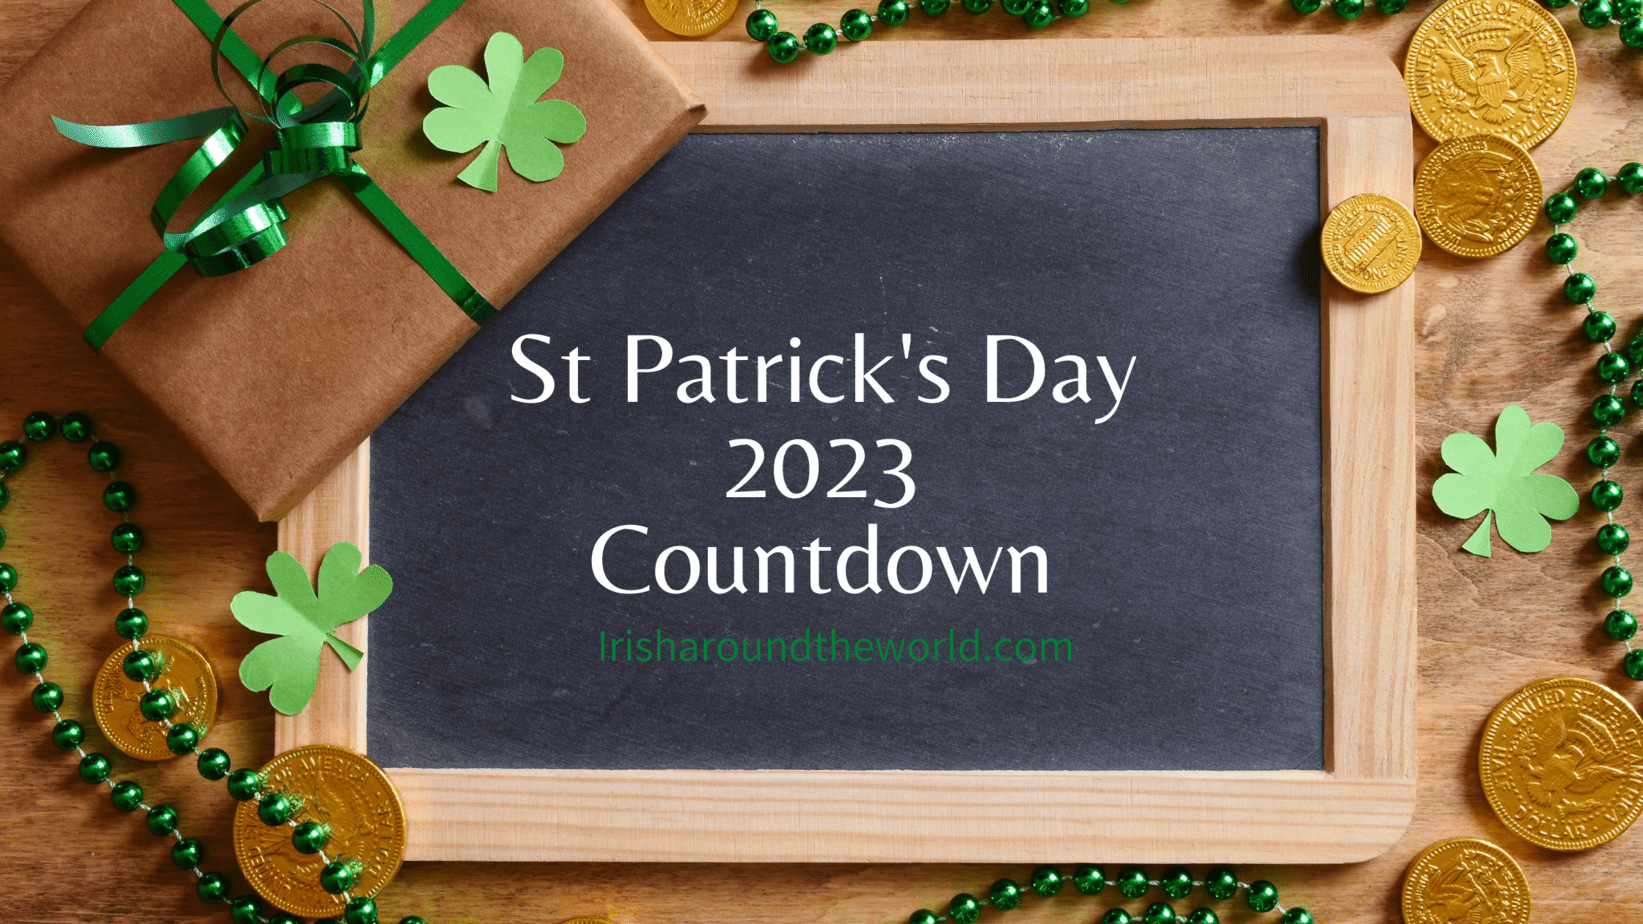 St Patrick's Day 2023 Countdown